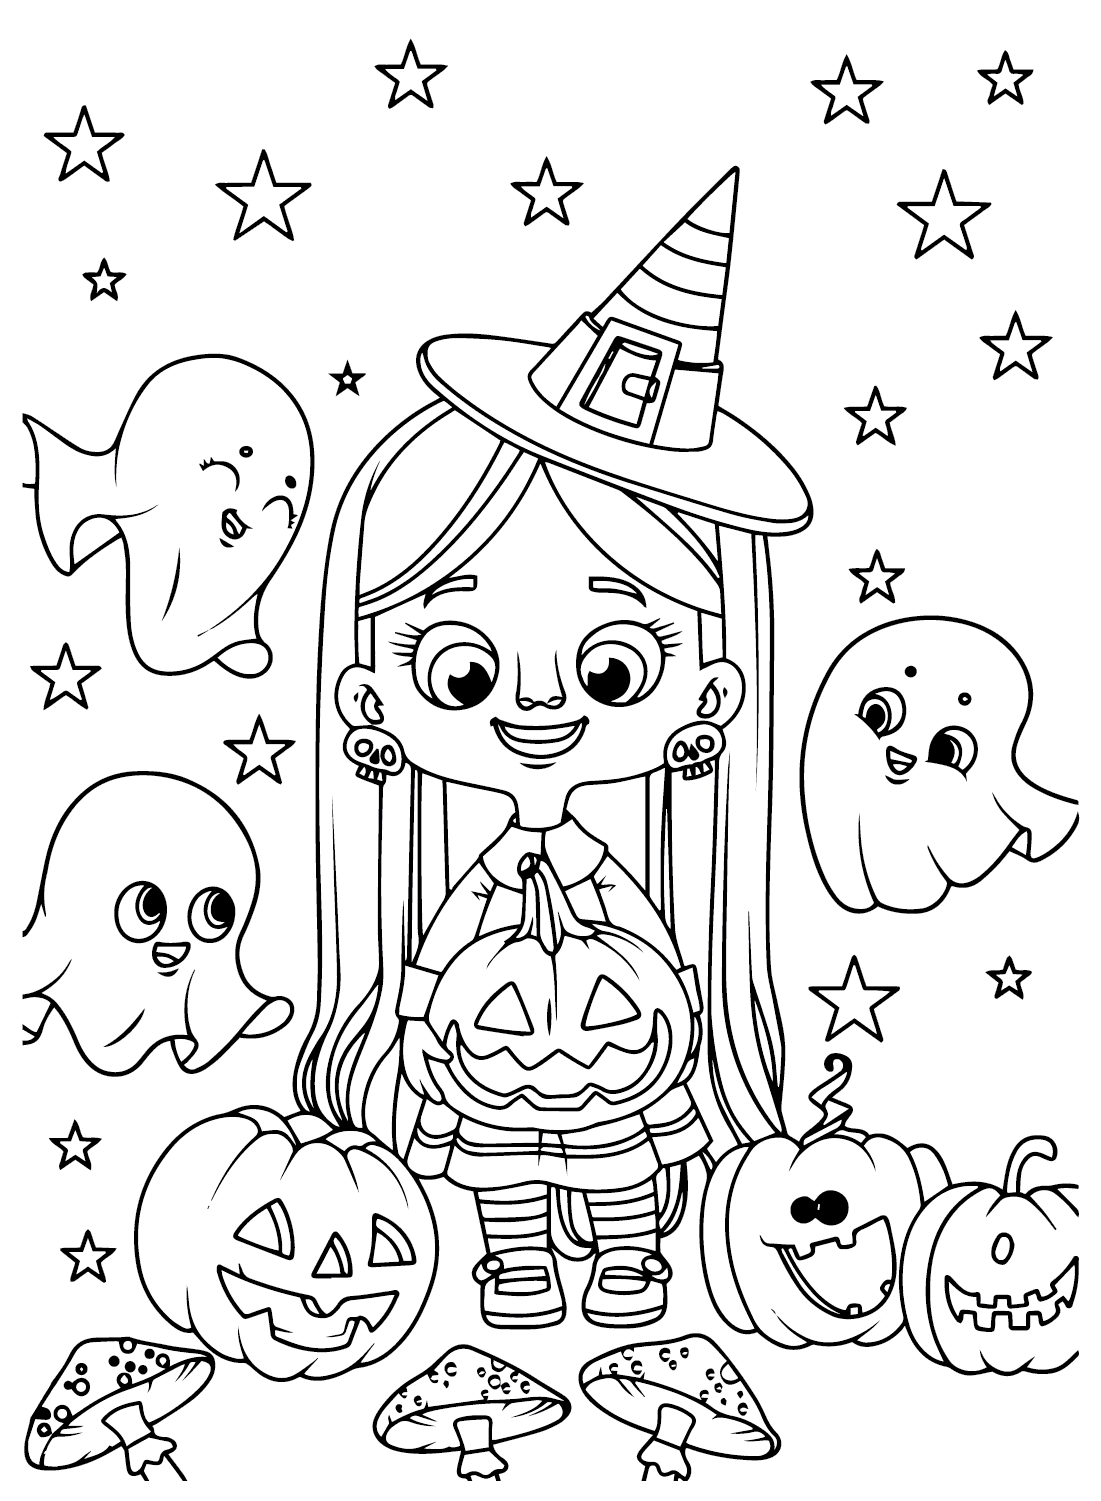 Cute Halloween Costume Coloring Page - Free Printable Coloring Pages